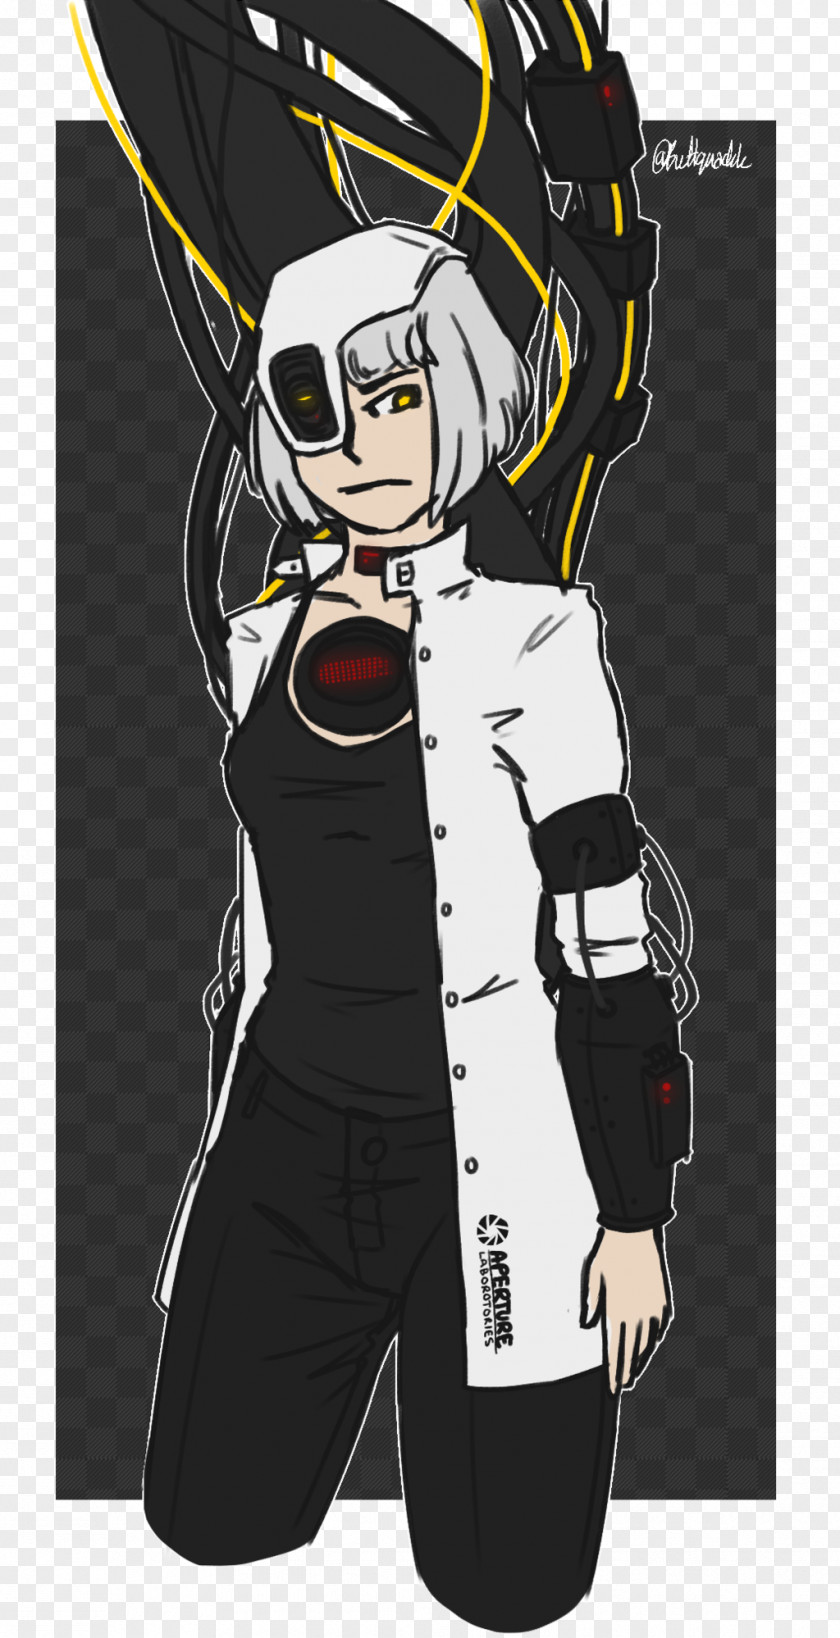 Glados Costume Design Poster Character PNG